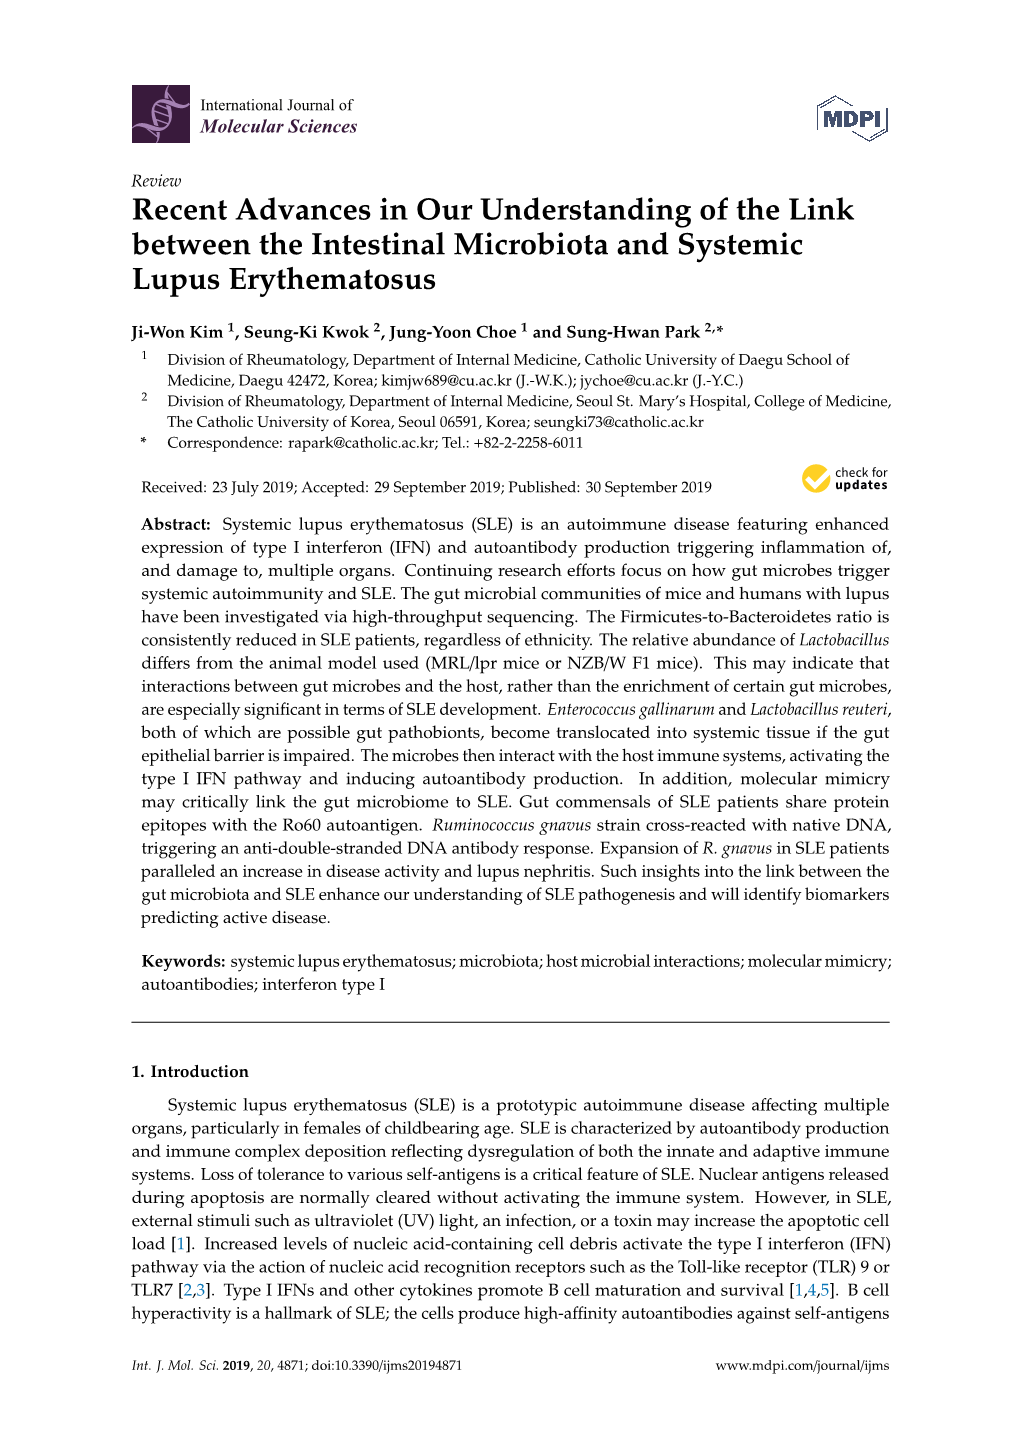 Recent Advances in Our Understanding of the Link Between the Intestinal Microbiota and Systemic Lupus Erythematosus